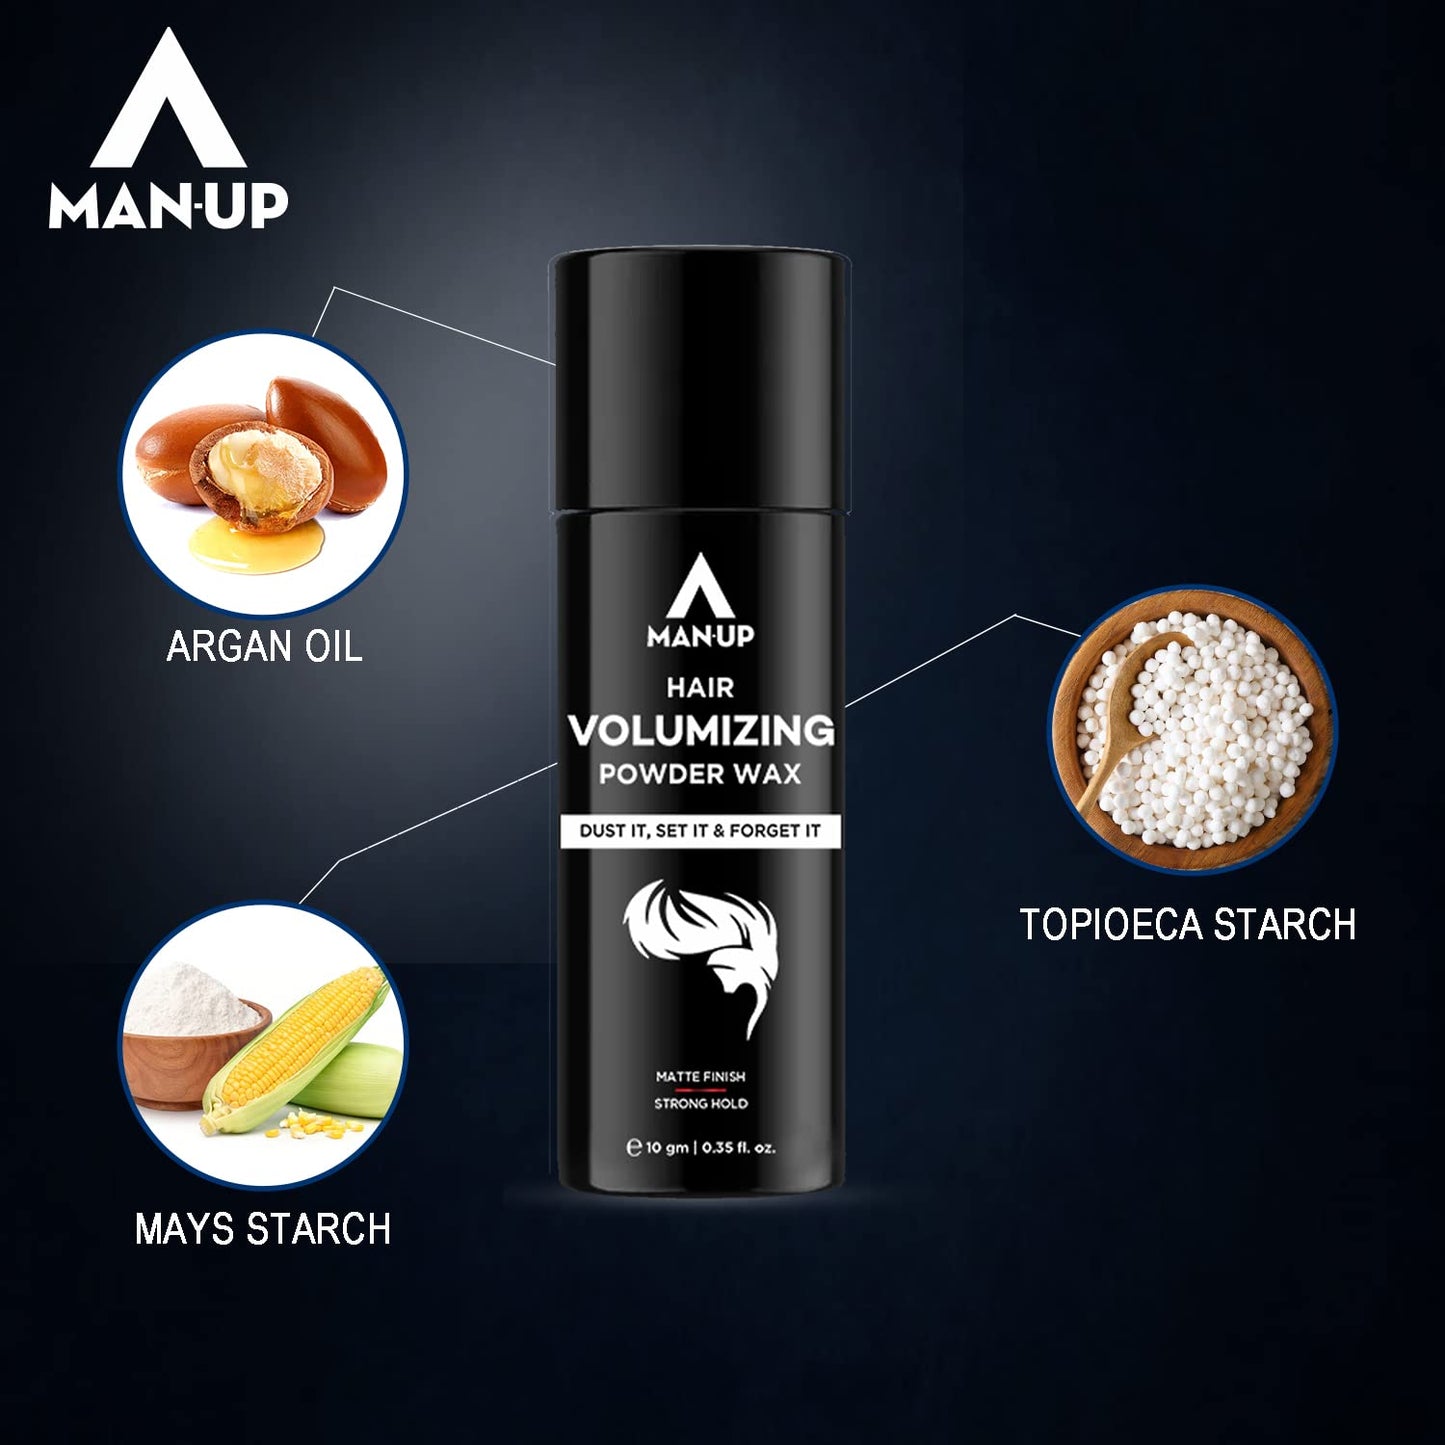 Man-Up Hair Volumizing Powder Wax For Men  Strong Hold With Matte Finish Hair Styling  All Natural Hair Styling Powder  For All Hair Types - 10gm Pack of 50